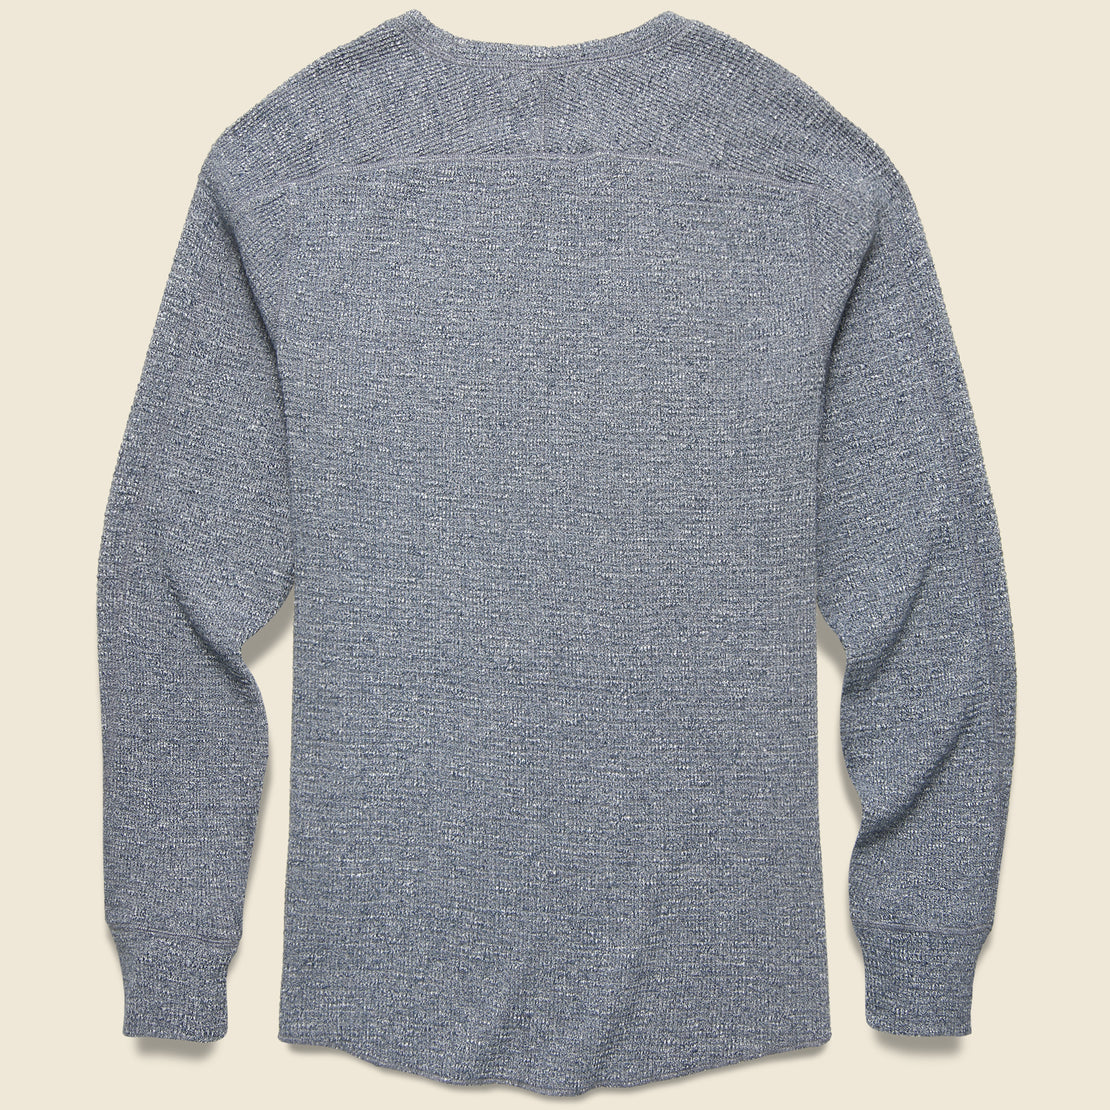 Waffle Crewneck Shirt - Blue Heather - RRL - STAG Provisions - Tops - L/S Knit